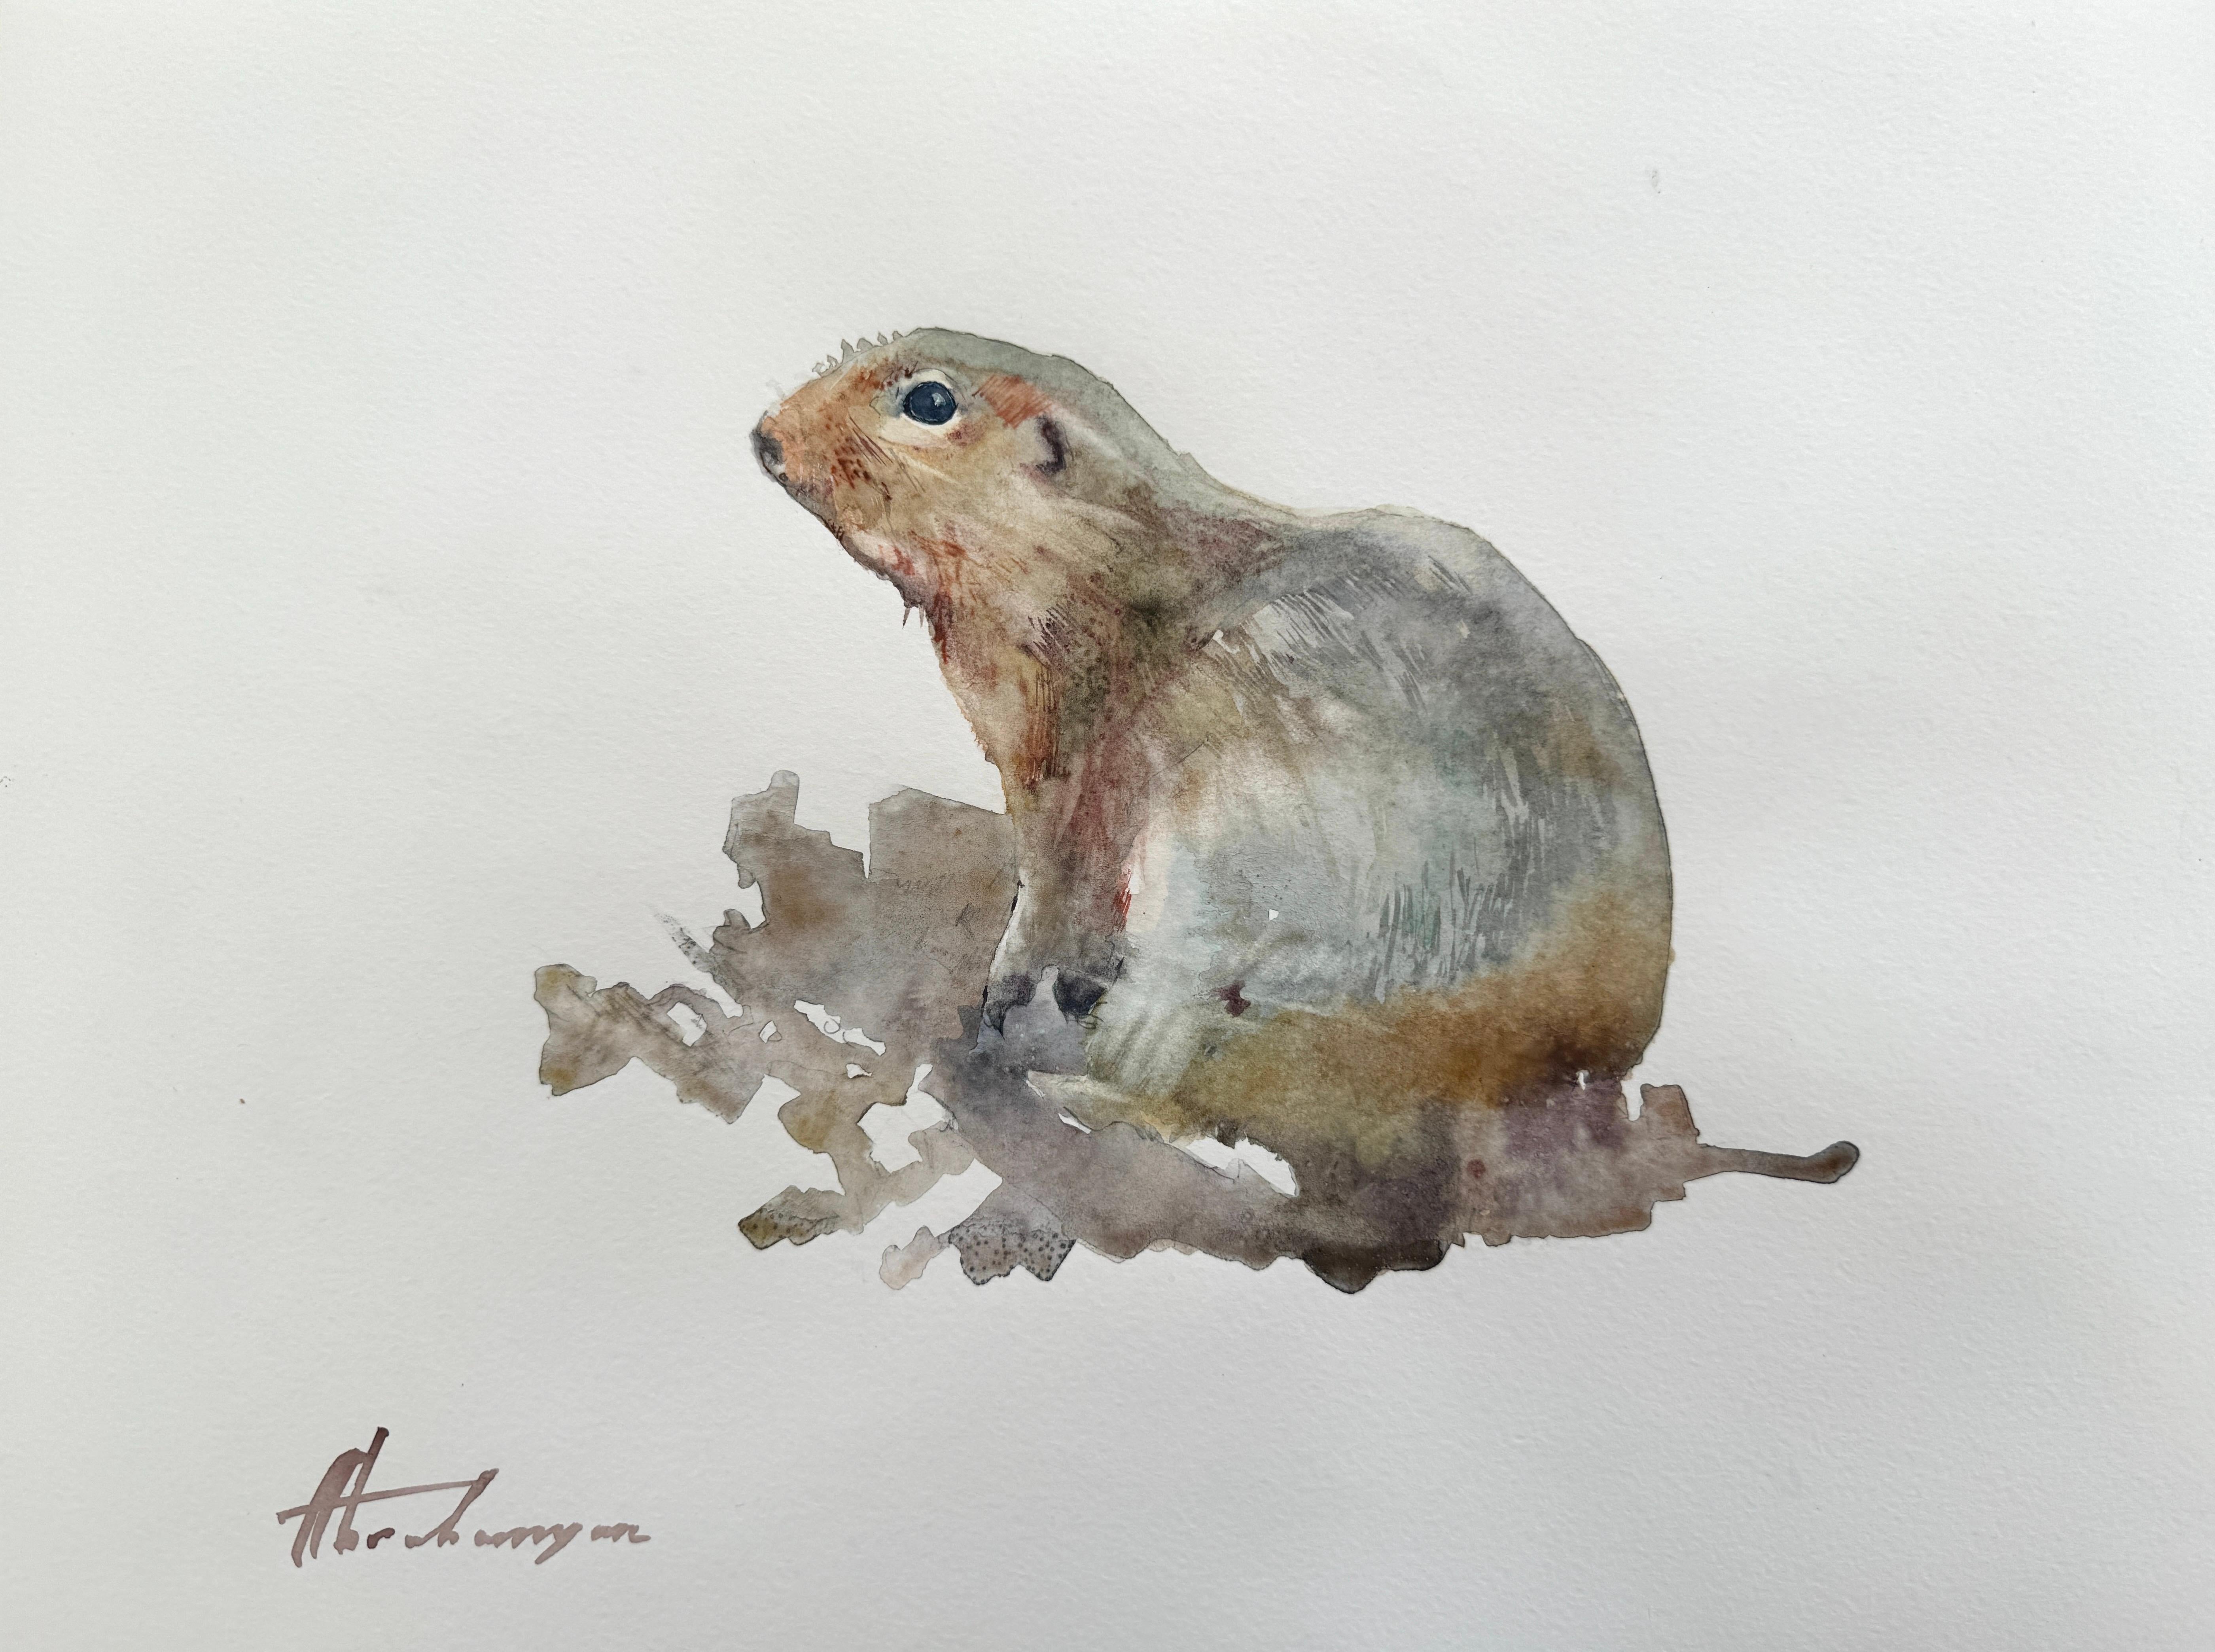 Artyom Abrahamyan Animal Art - Beaver, Watercolor on Paper, Handmade Painting, One of a Kind